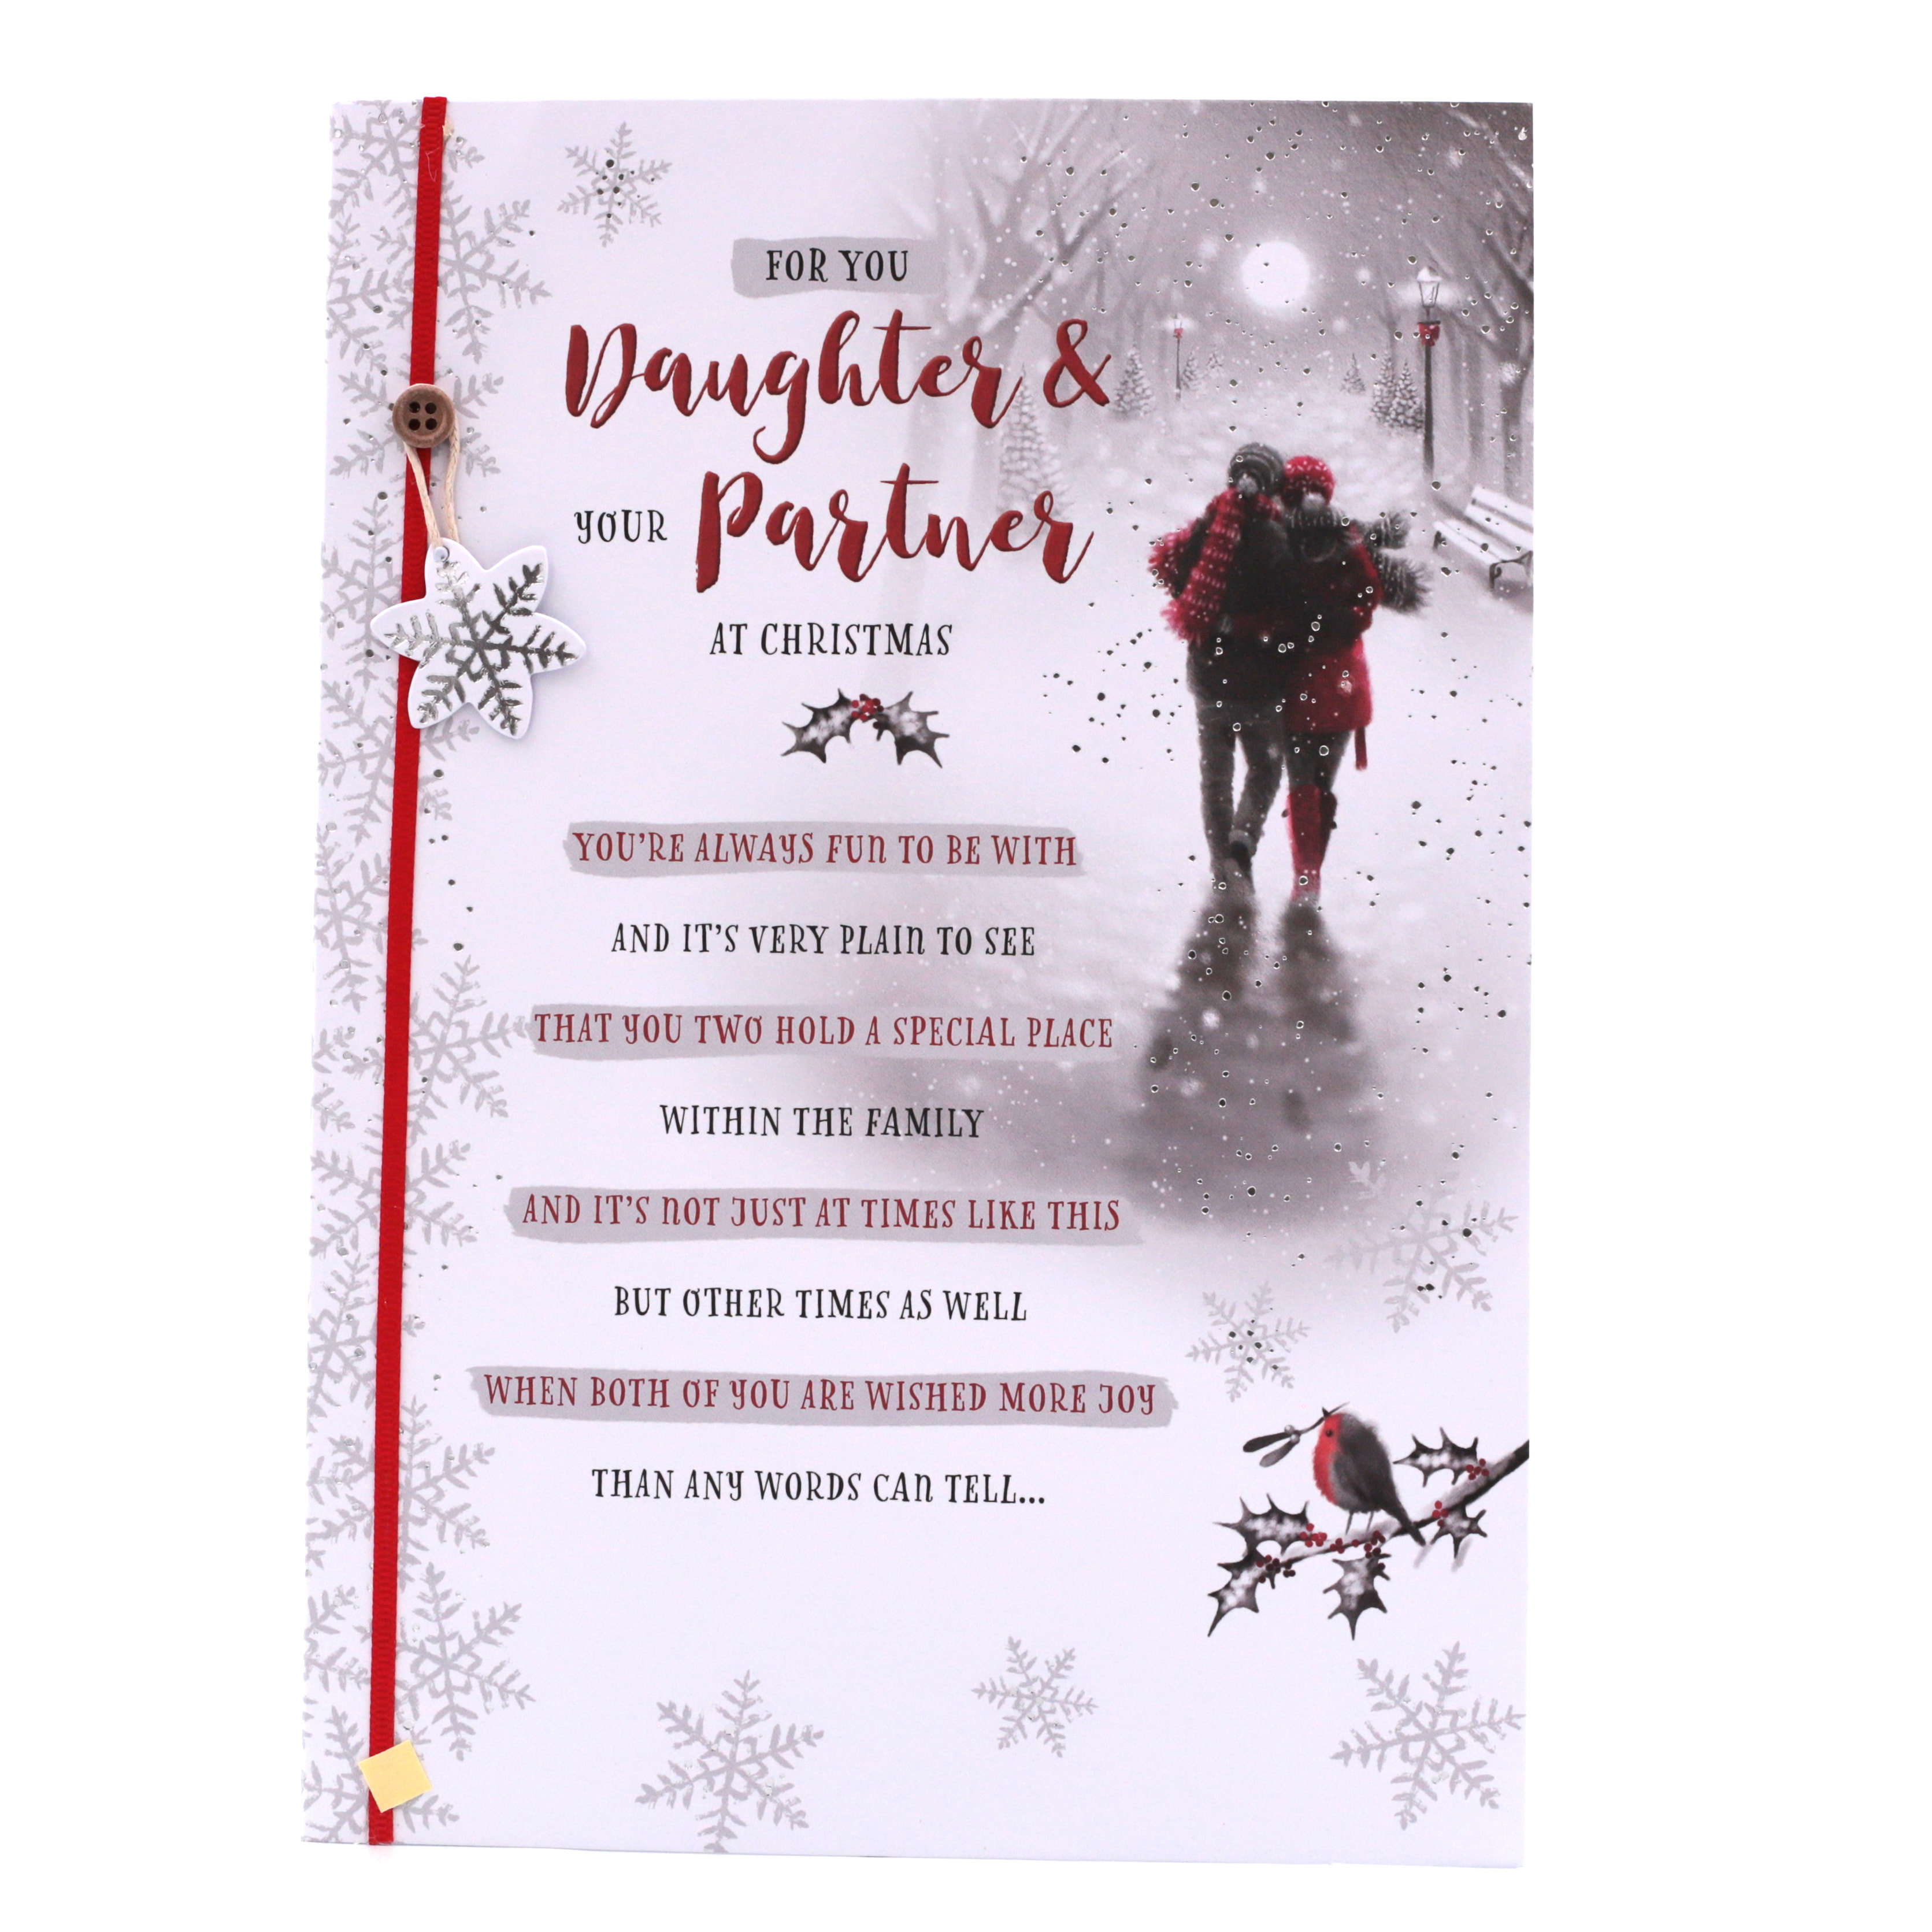 Christmas Card - Daughter And Partner, Couple Walking In The Snow